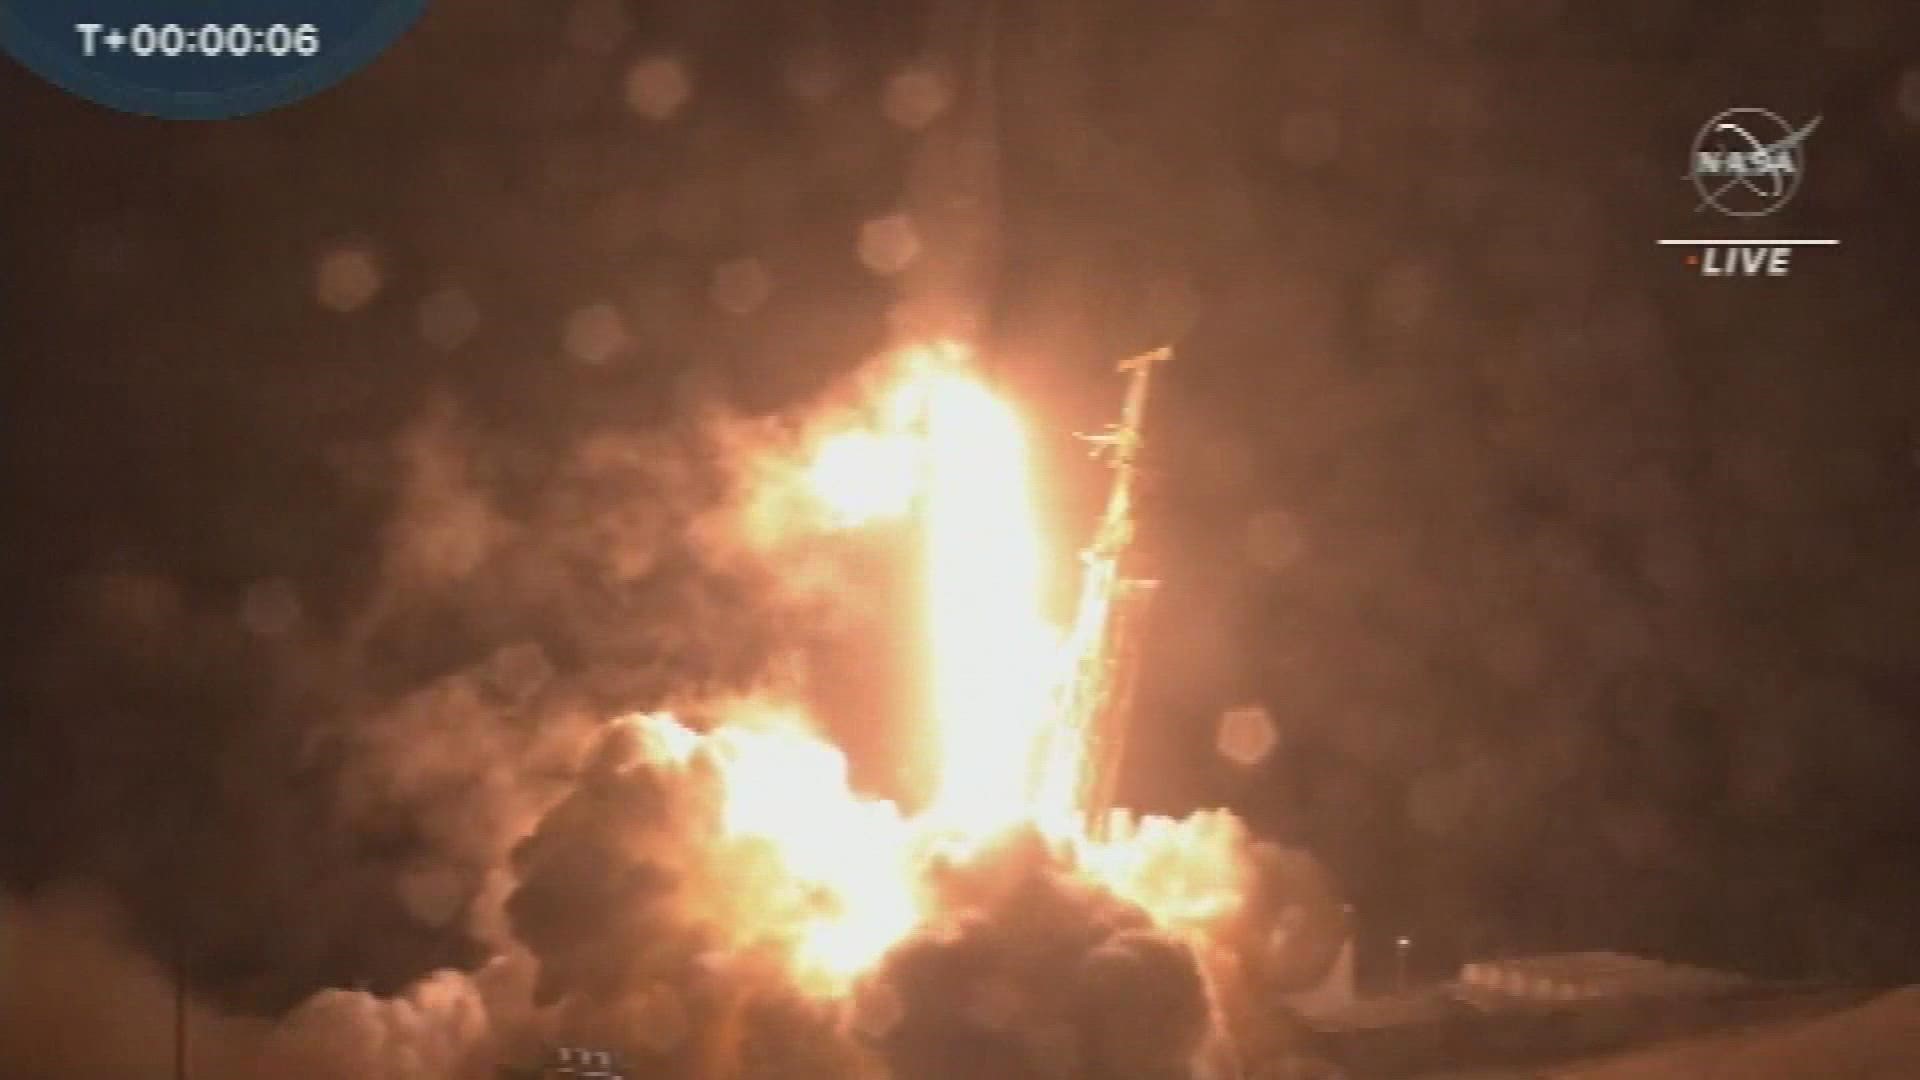 The historic test is supposed to happen a little after 7. NASA launched the spacecraft back in November from California.